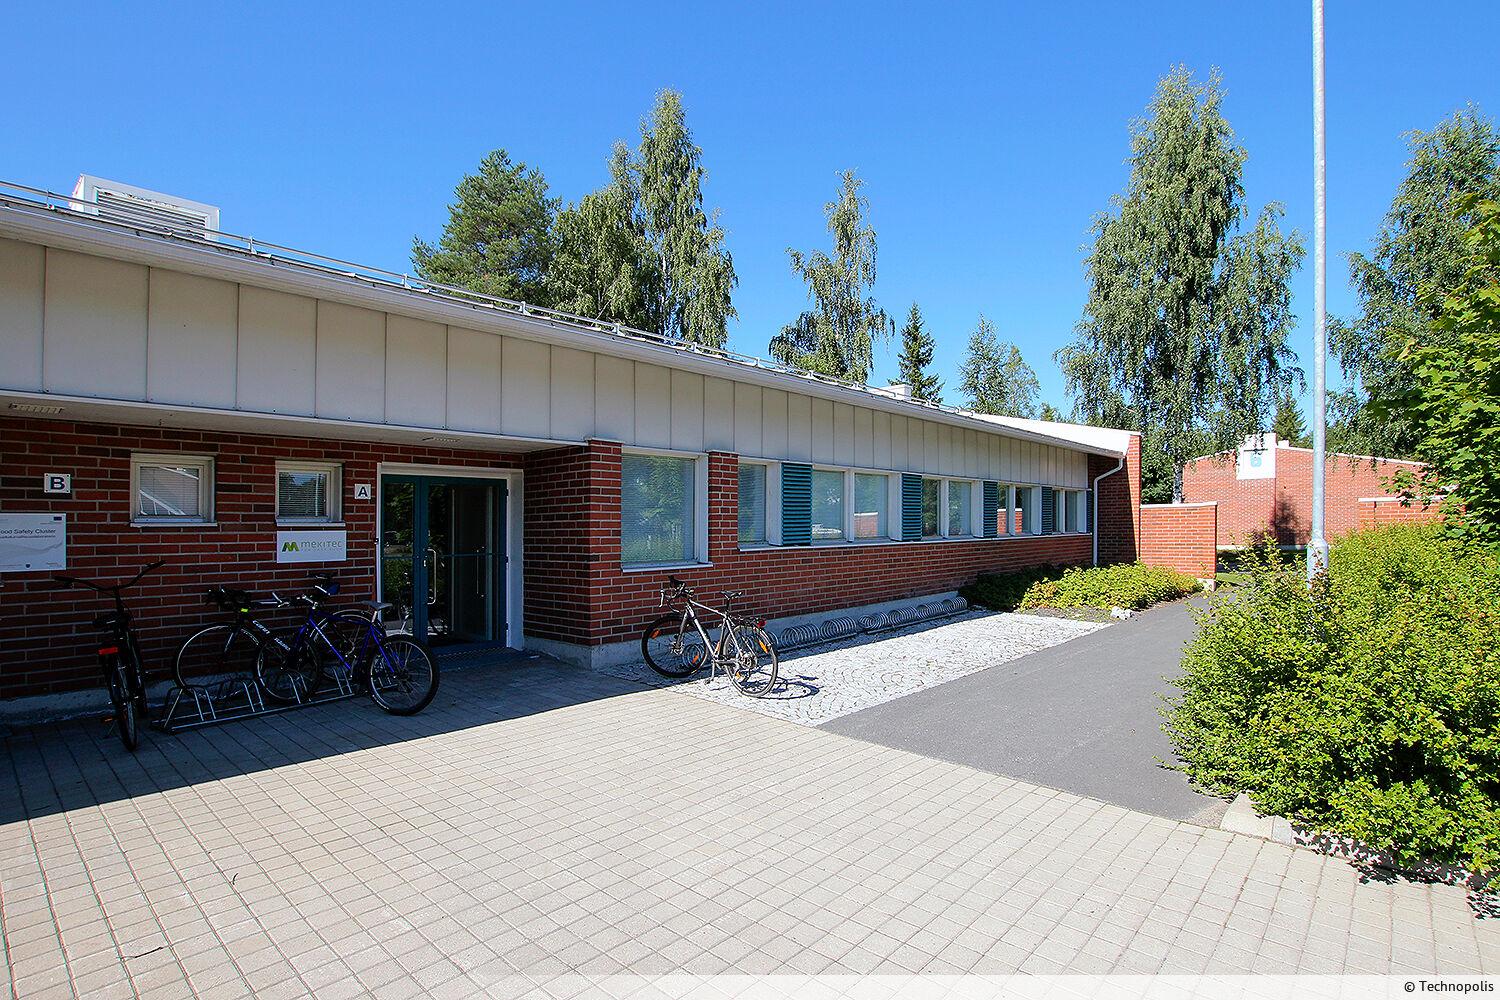 For rent, a spacious office space consisting of an open space and rooms in Technopolis Linnanmaa Technology Village. Technopolis offers comprehensive services to its tenants.